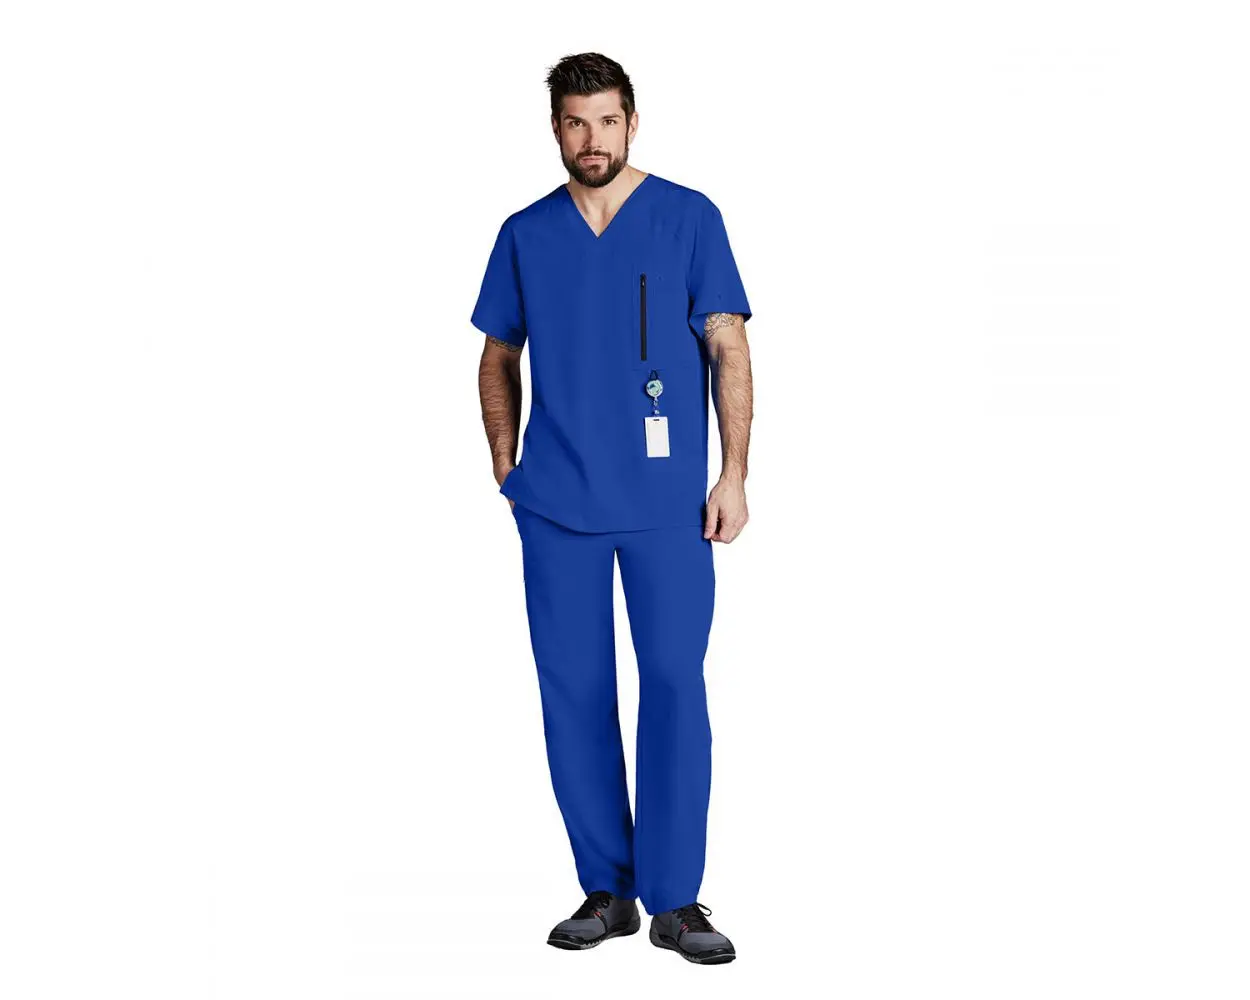 Unisex Hospital Uniforms Scrub Sets Private Label Healthcare Medical Adult Scrubs Suits with customized colors and sizes